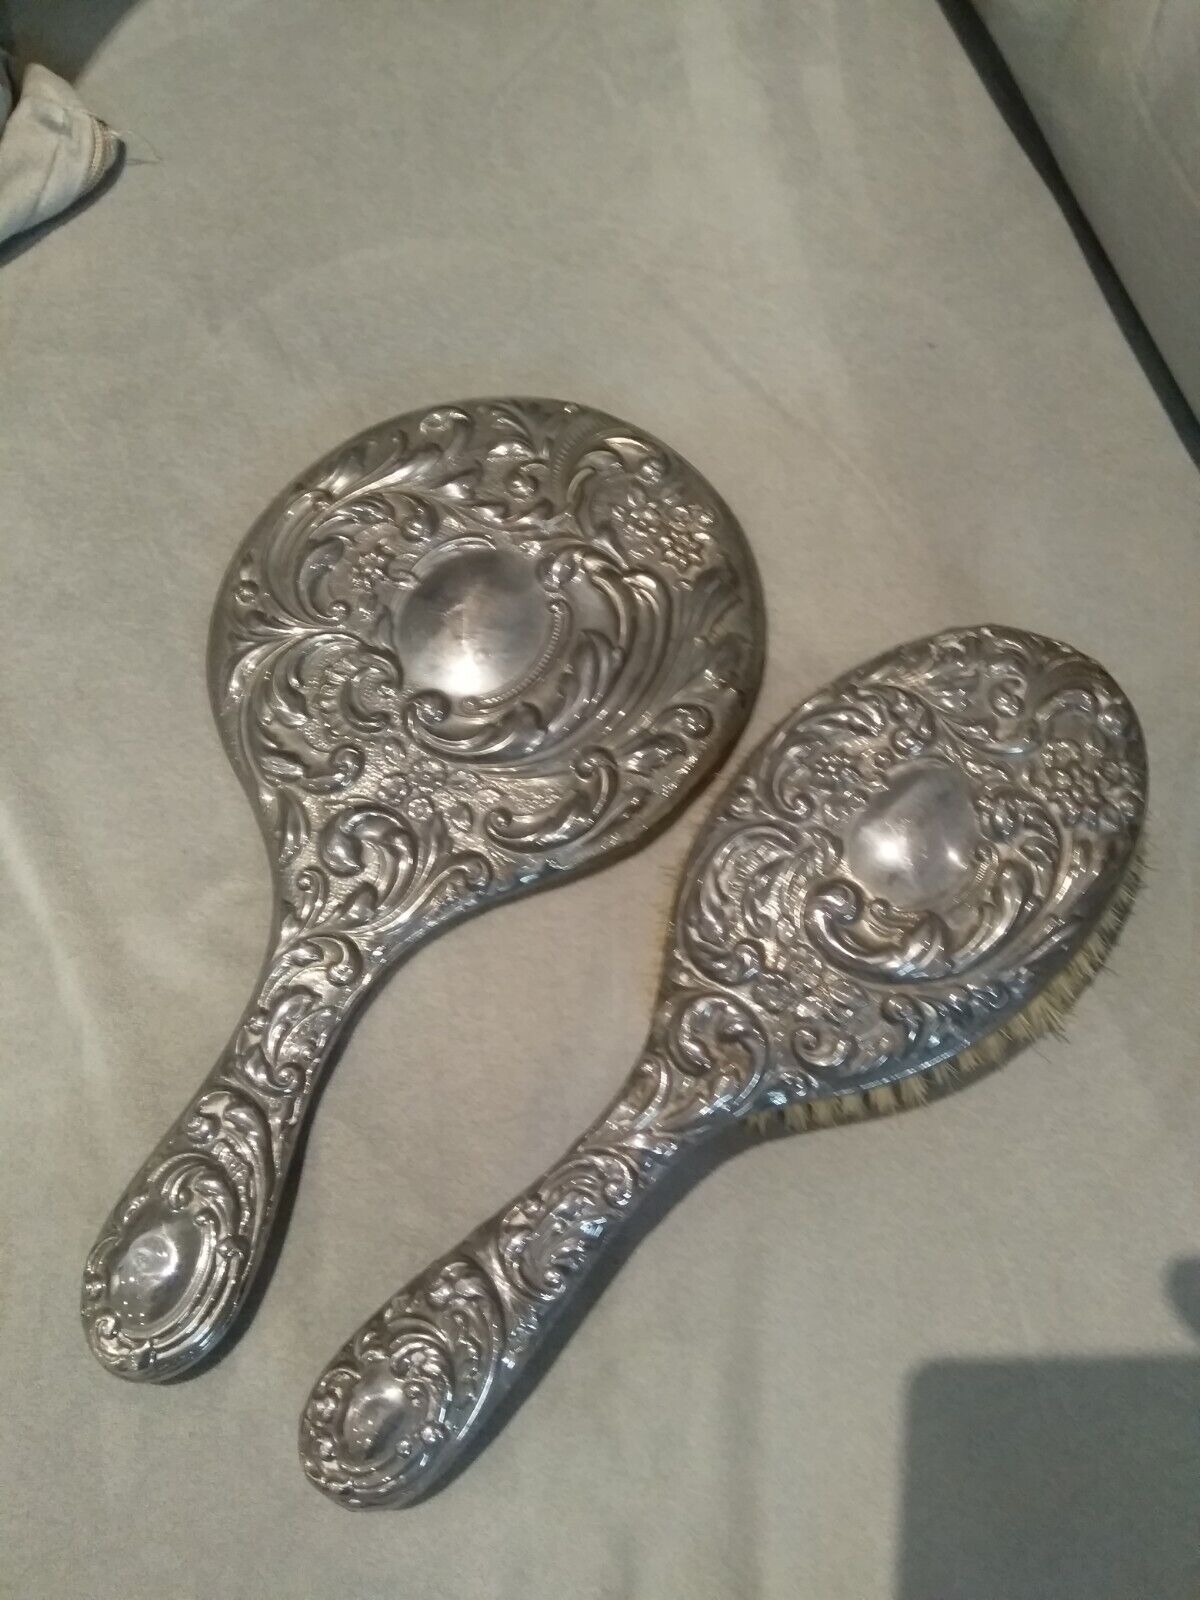 Antique Hand Mirror And Hair Brush.As Found.